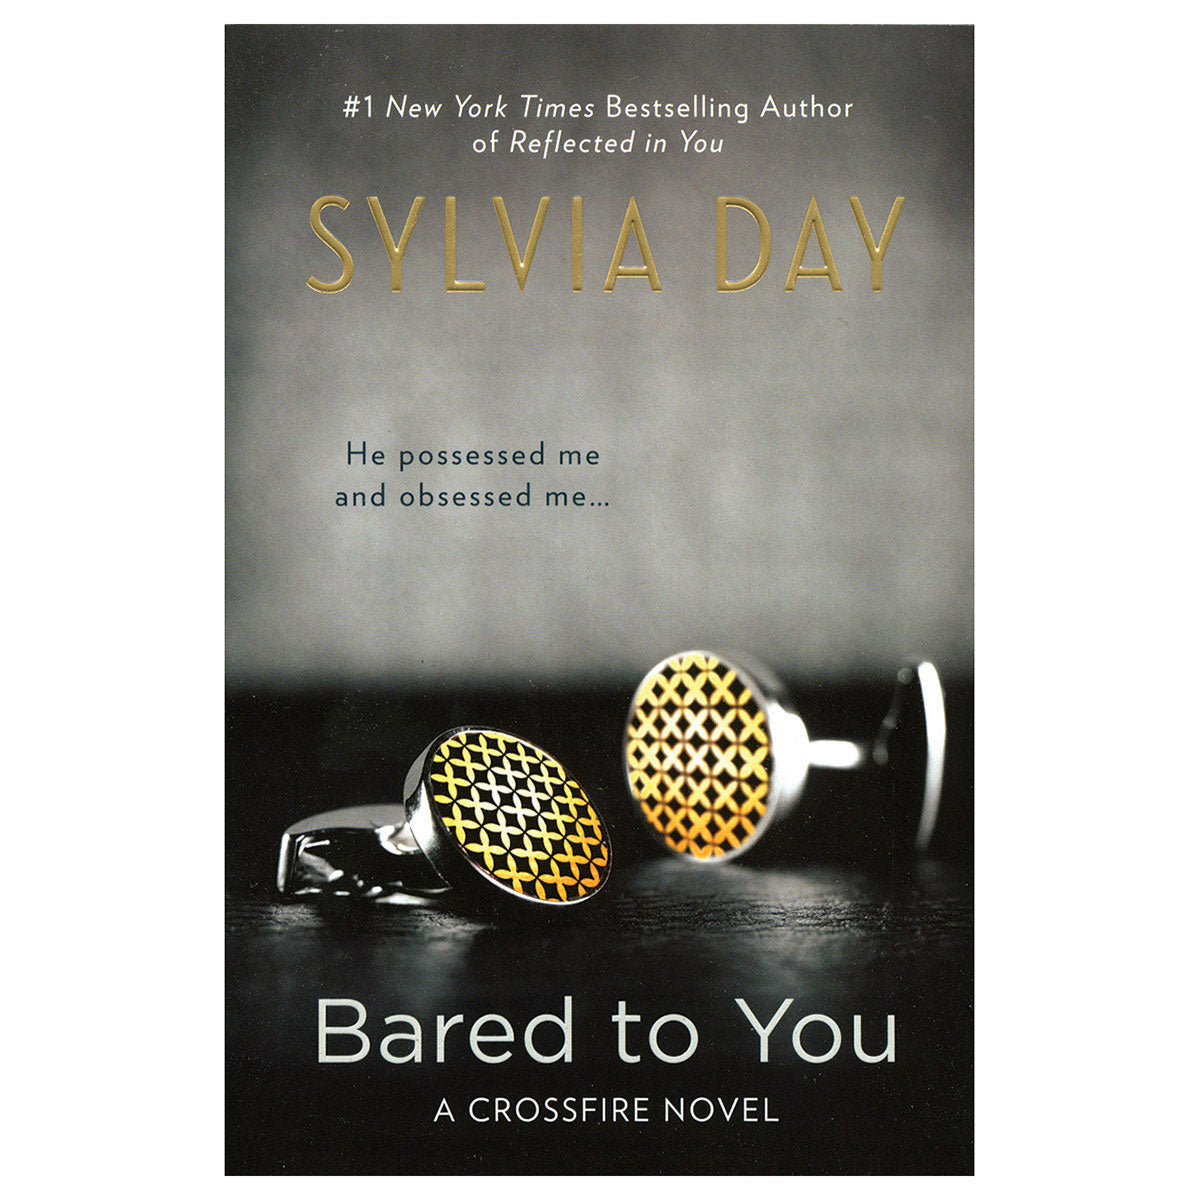 Bared to You by Sylvia Day - A Crossfire Novel